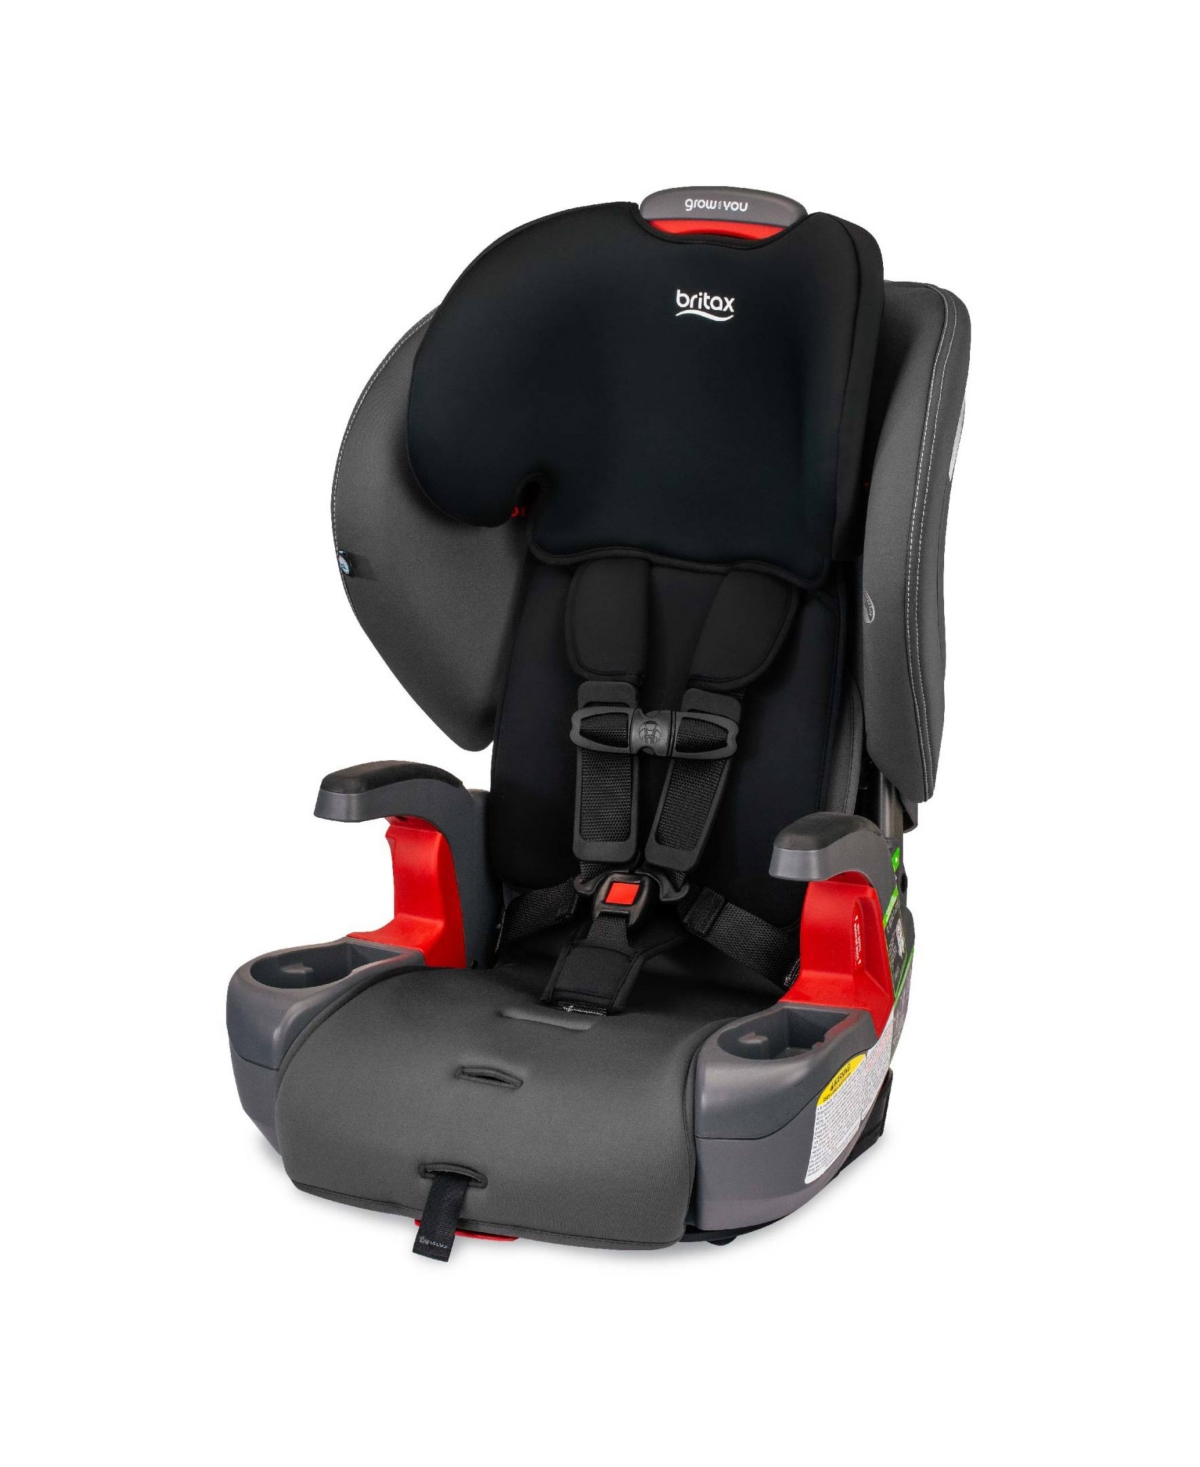 Britax Grow With You Harness-2-booster In Mod Black